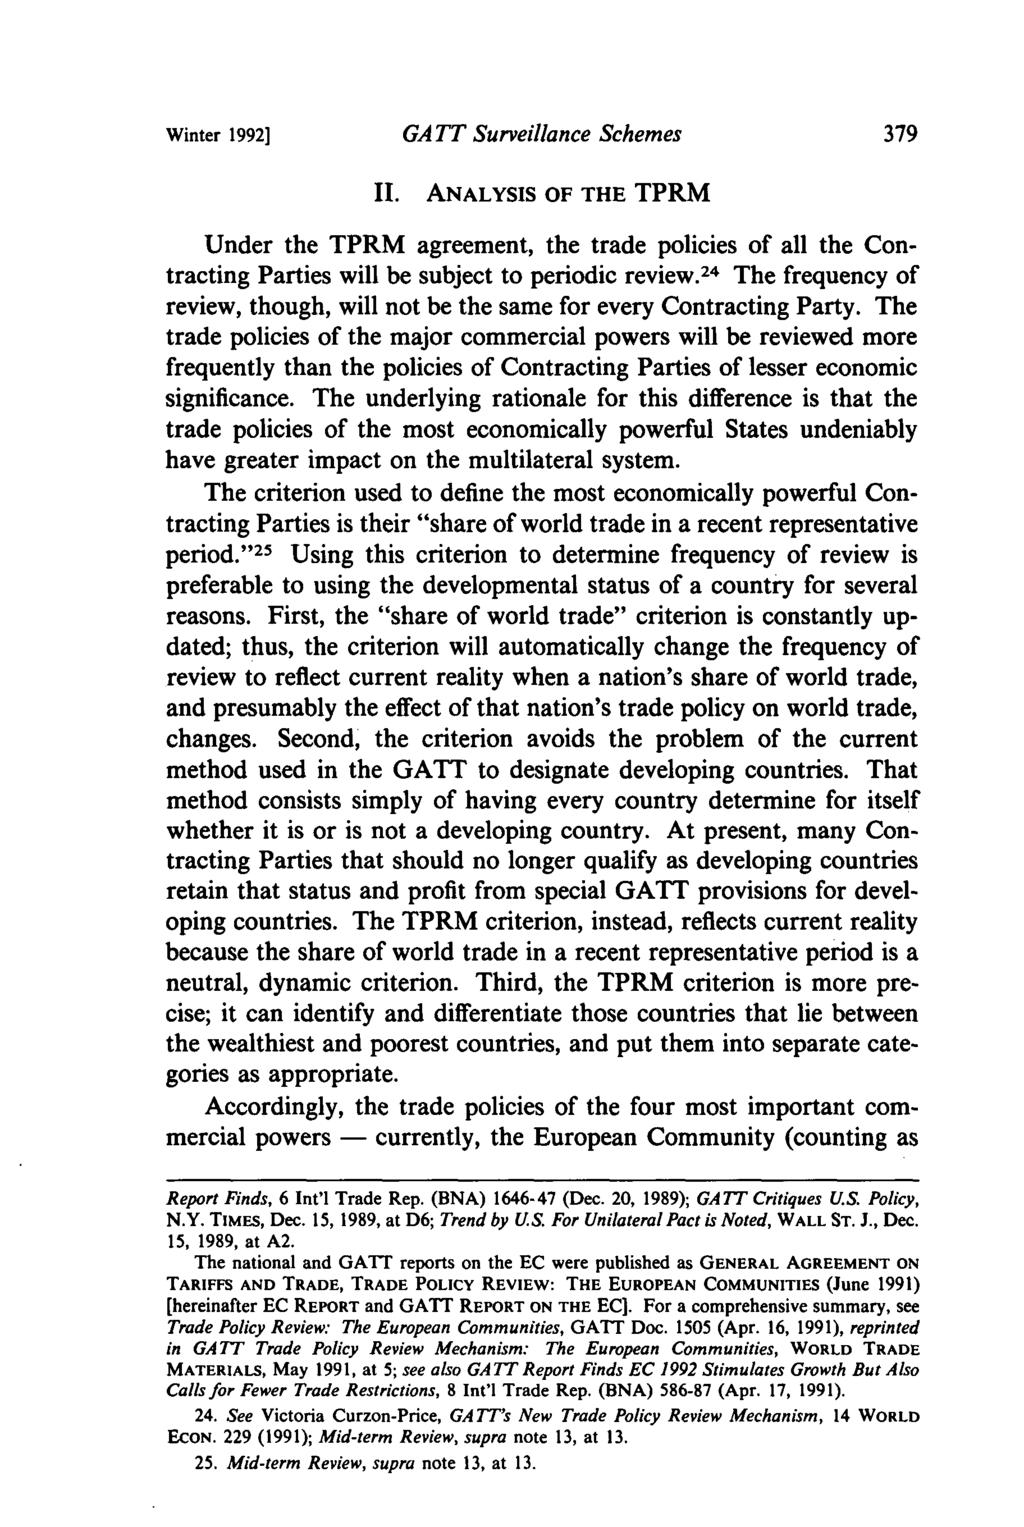 Winter 1992] GA TT Surveillance Schemes II. ANALYSIS OF THE TPRM Under the TPRM agreement, the trade policies of all the Contracting Parties will be subject to periodic review.